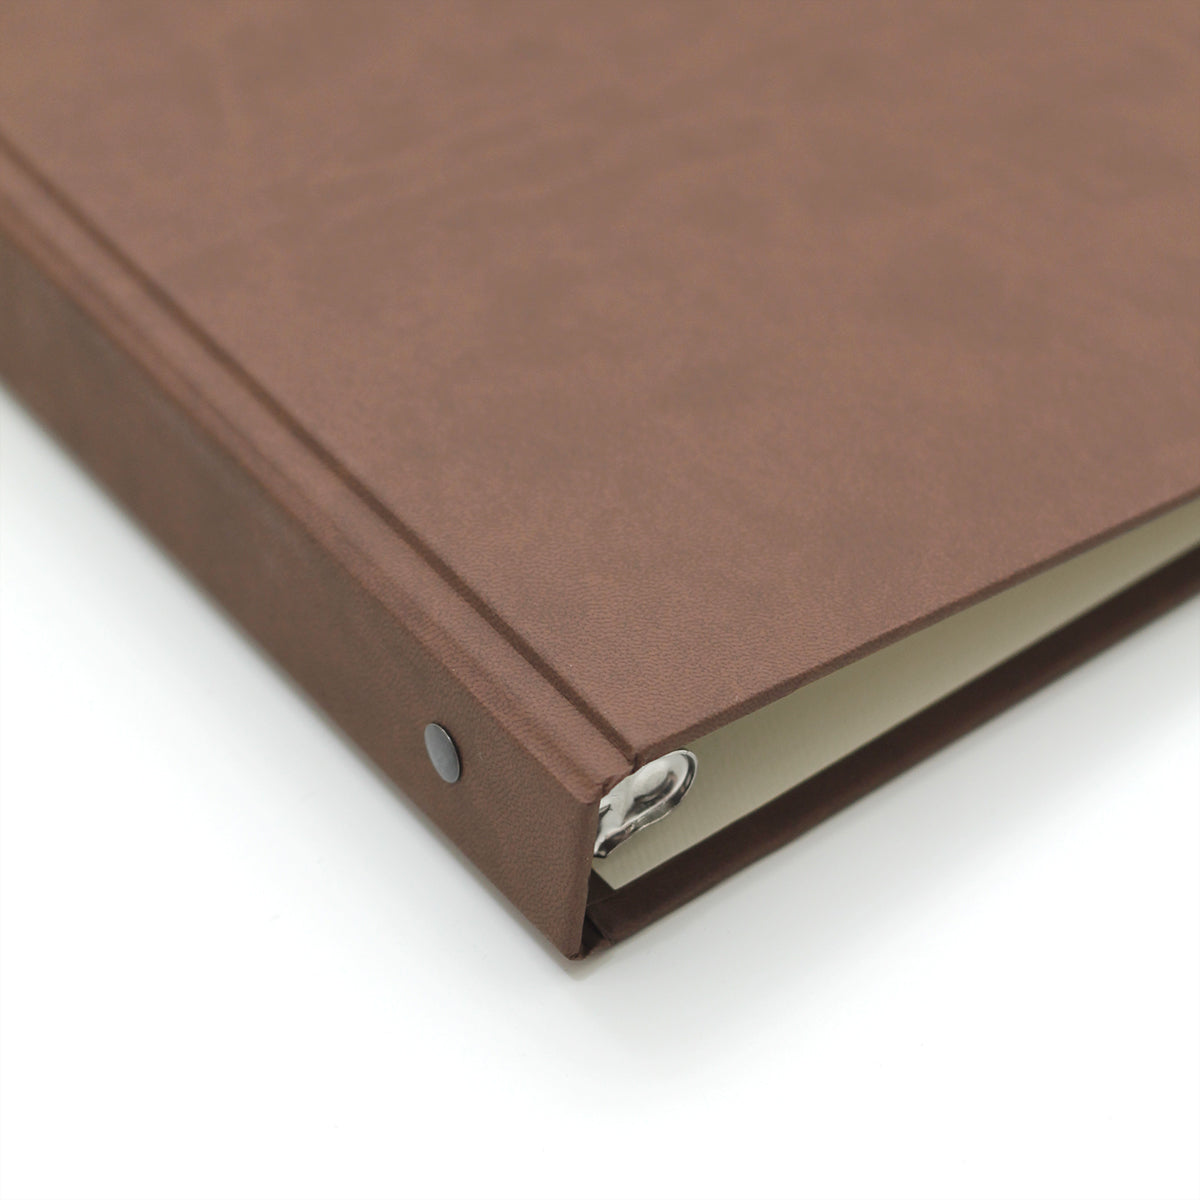 Photo Binder for 5x7 photos | Cover: Mocha Vegan Leather | Available Personalized